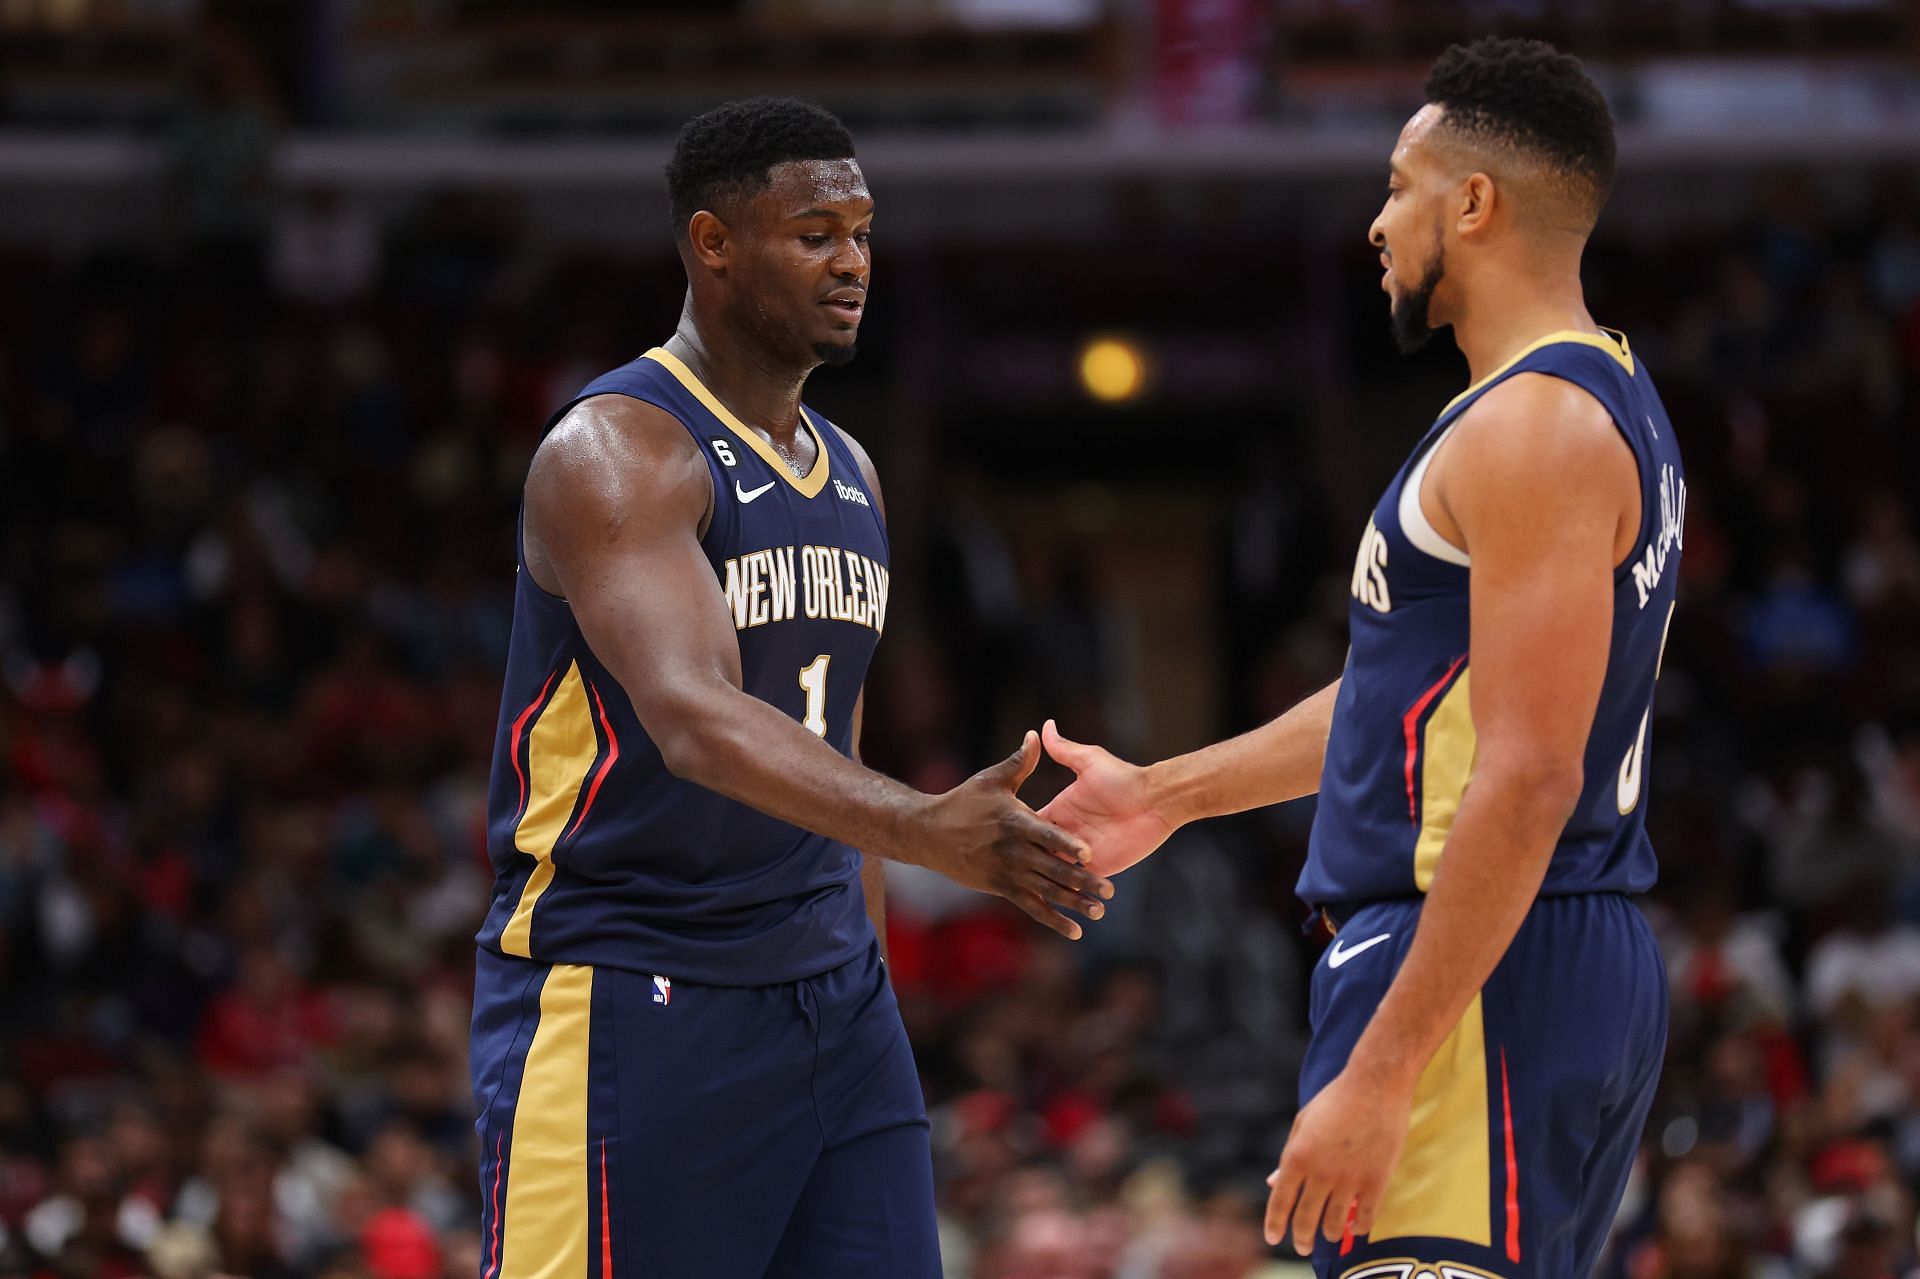 CJ McCollum and Zion Williamson could make big things happen in New Orleans (Image via Getty Images)